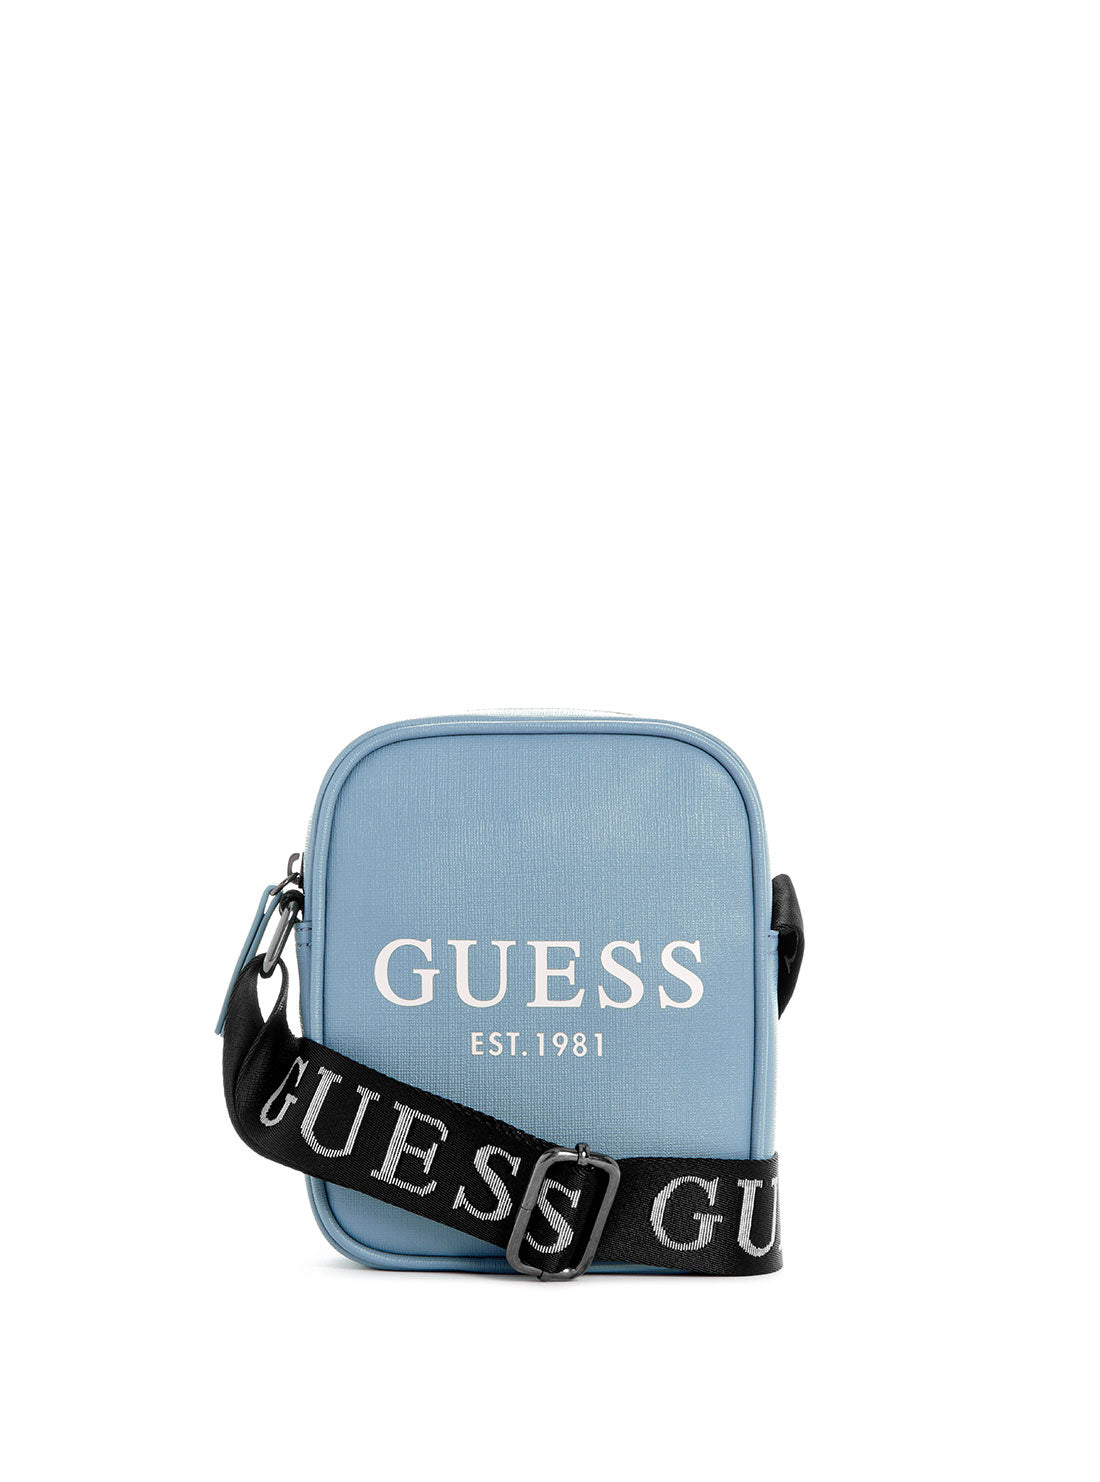 GUESS Black Logo Outfitter Camera Bag front view